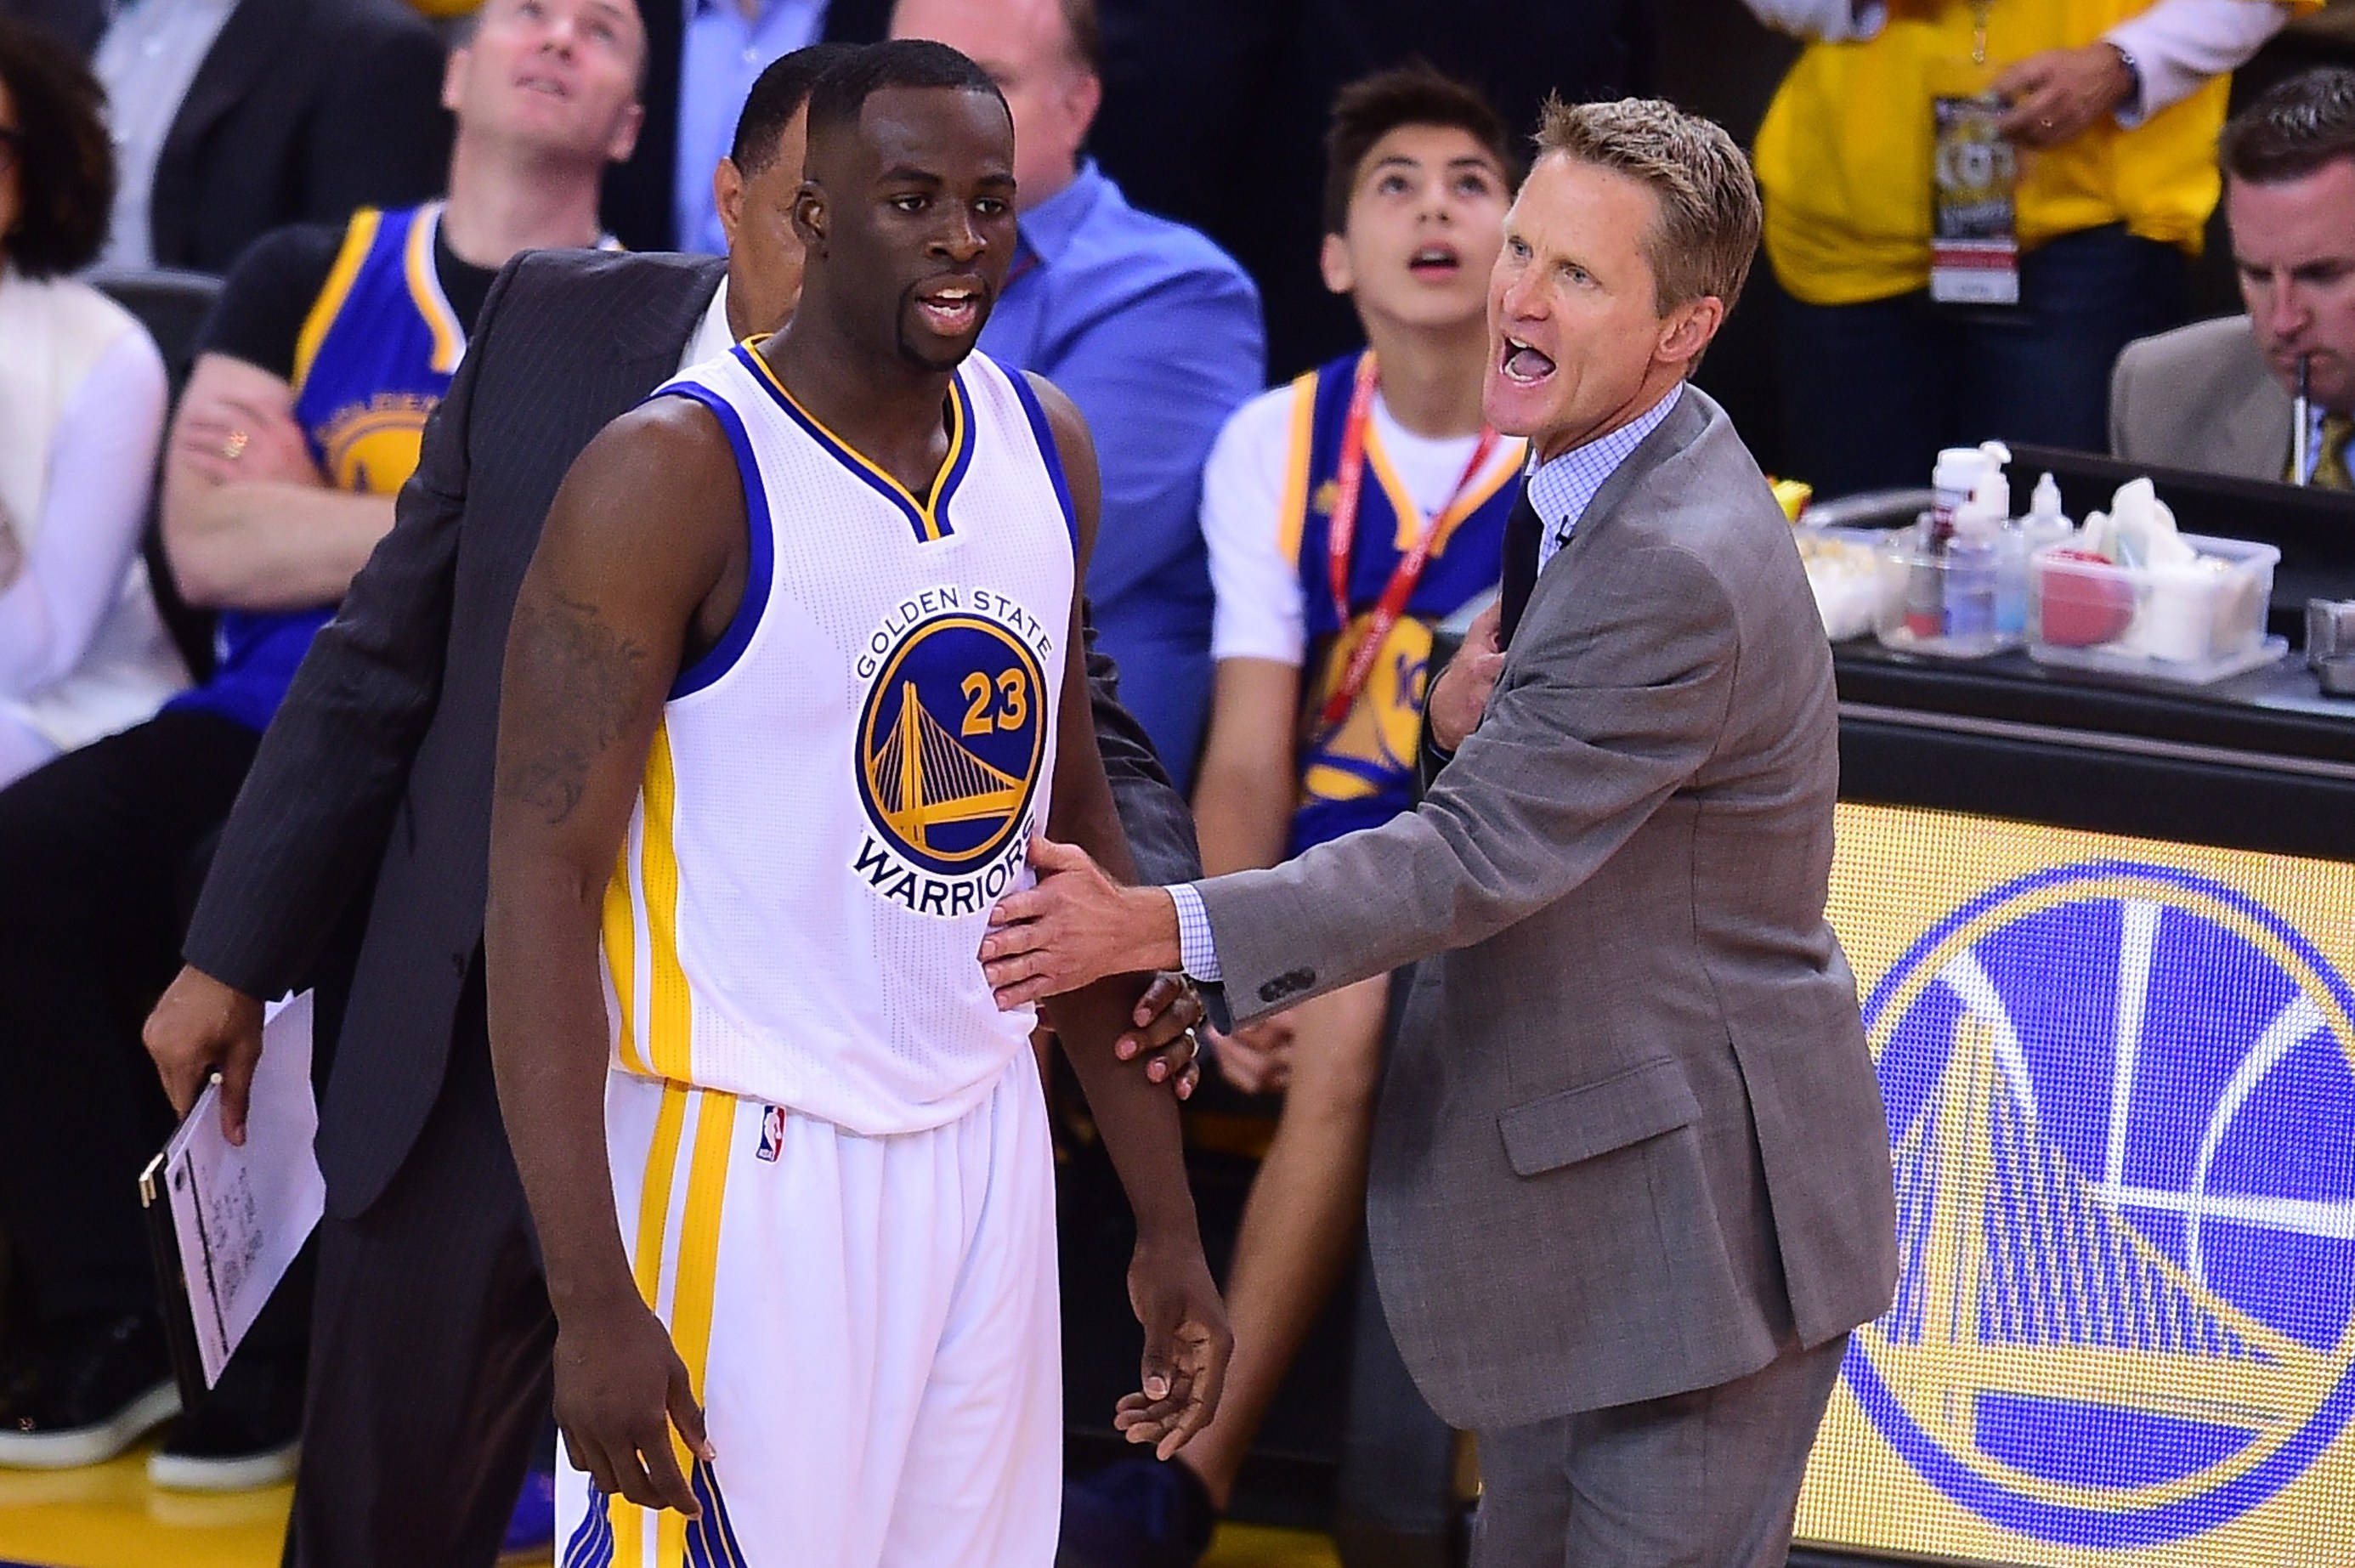 Steve Kerr and Staff to Coach 2015 Western Conference All-Star